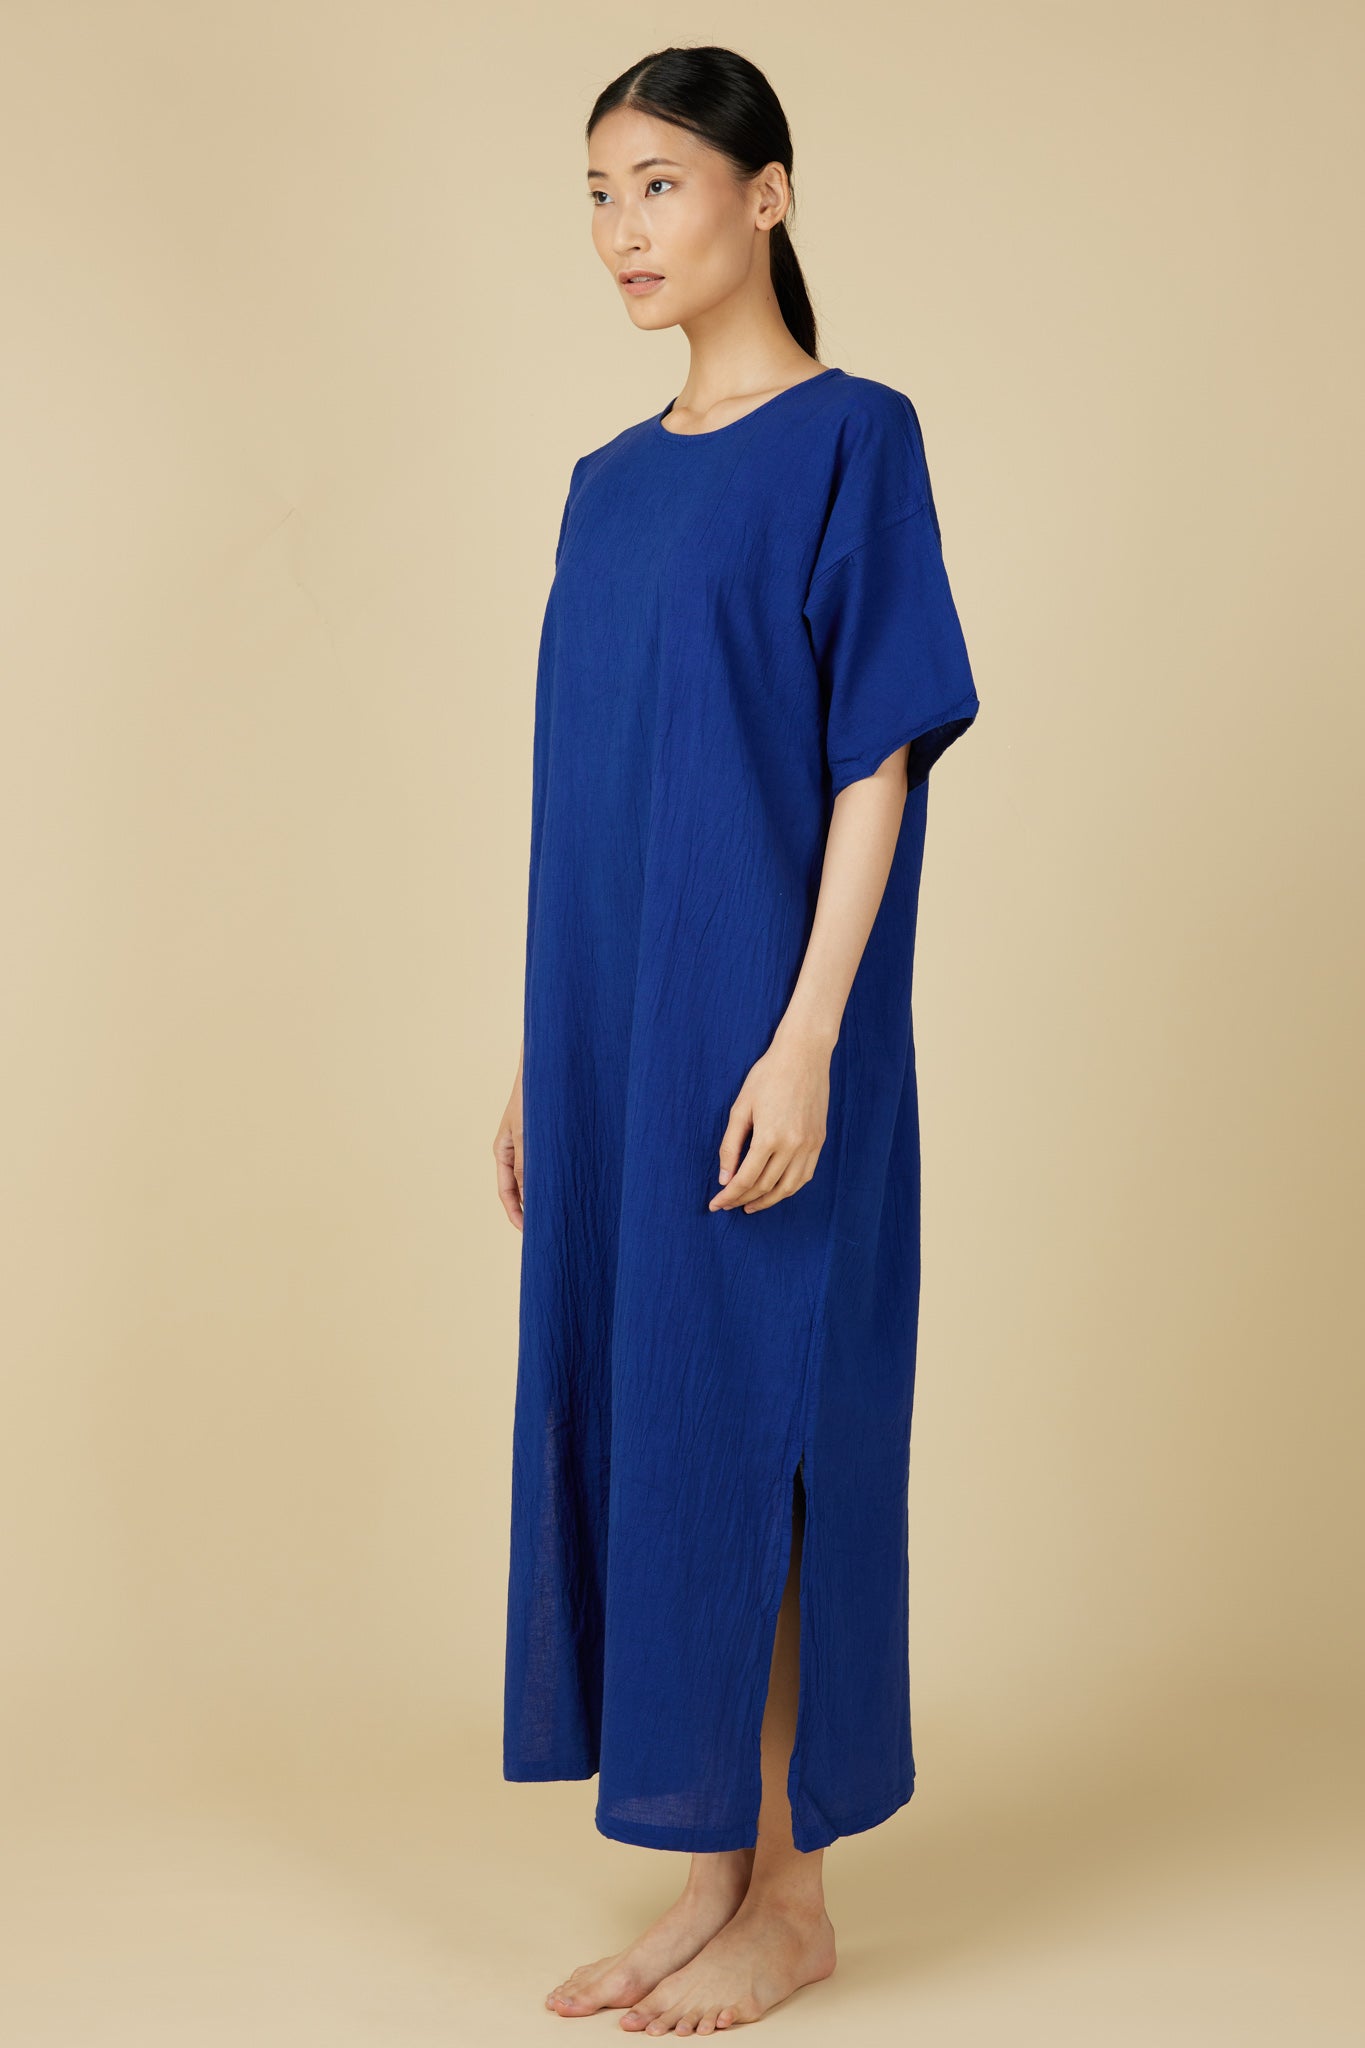 Hand Dyed Short Sleeve Dress in Royal Blue